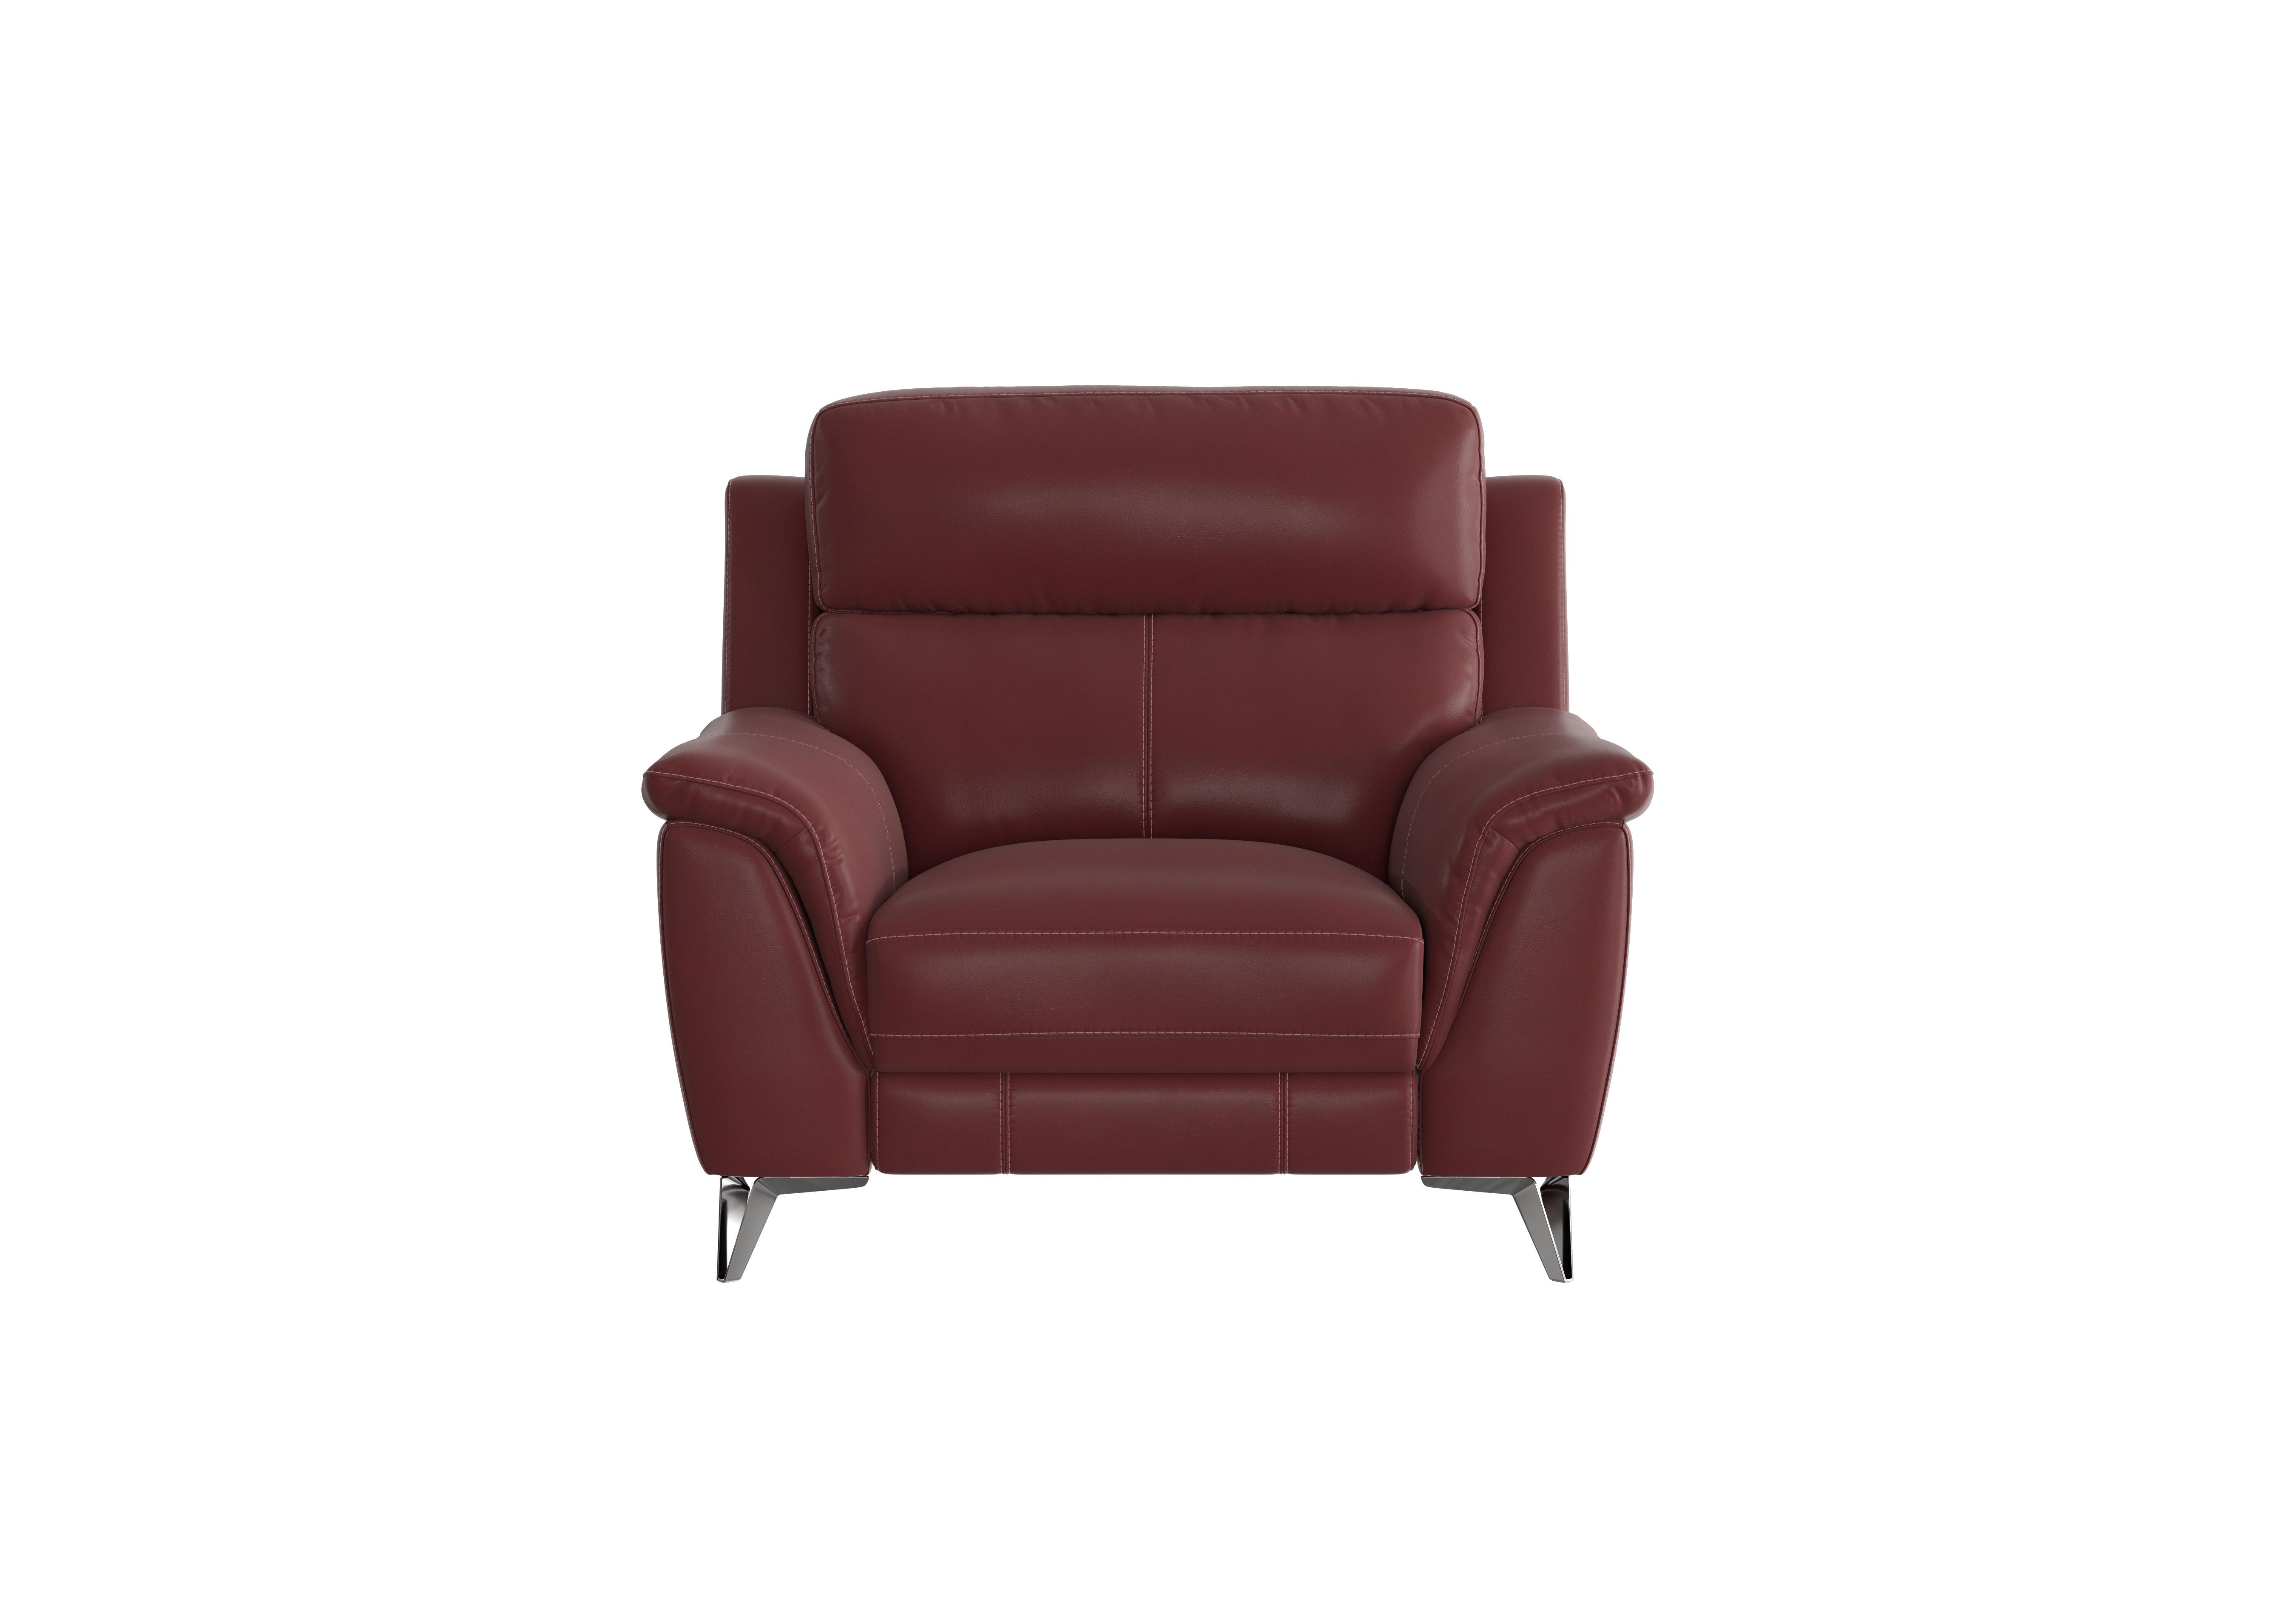 Contempo Leather Armchair in Bv-035c Deep Red on Furniture Village